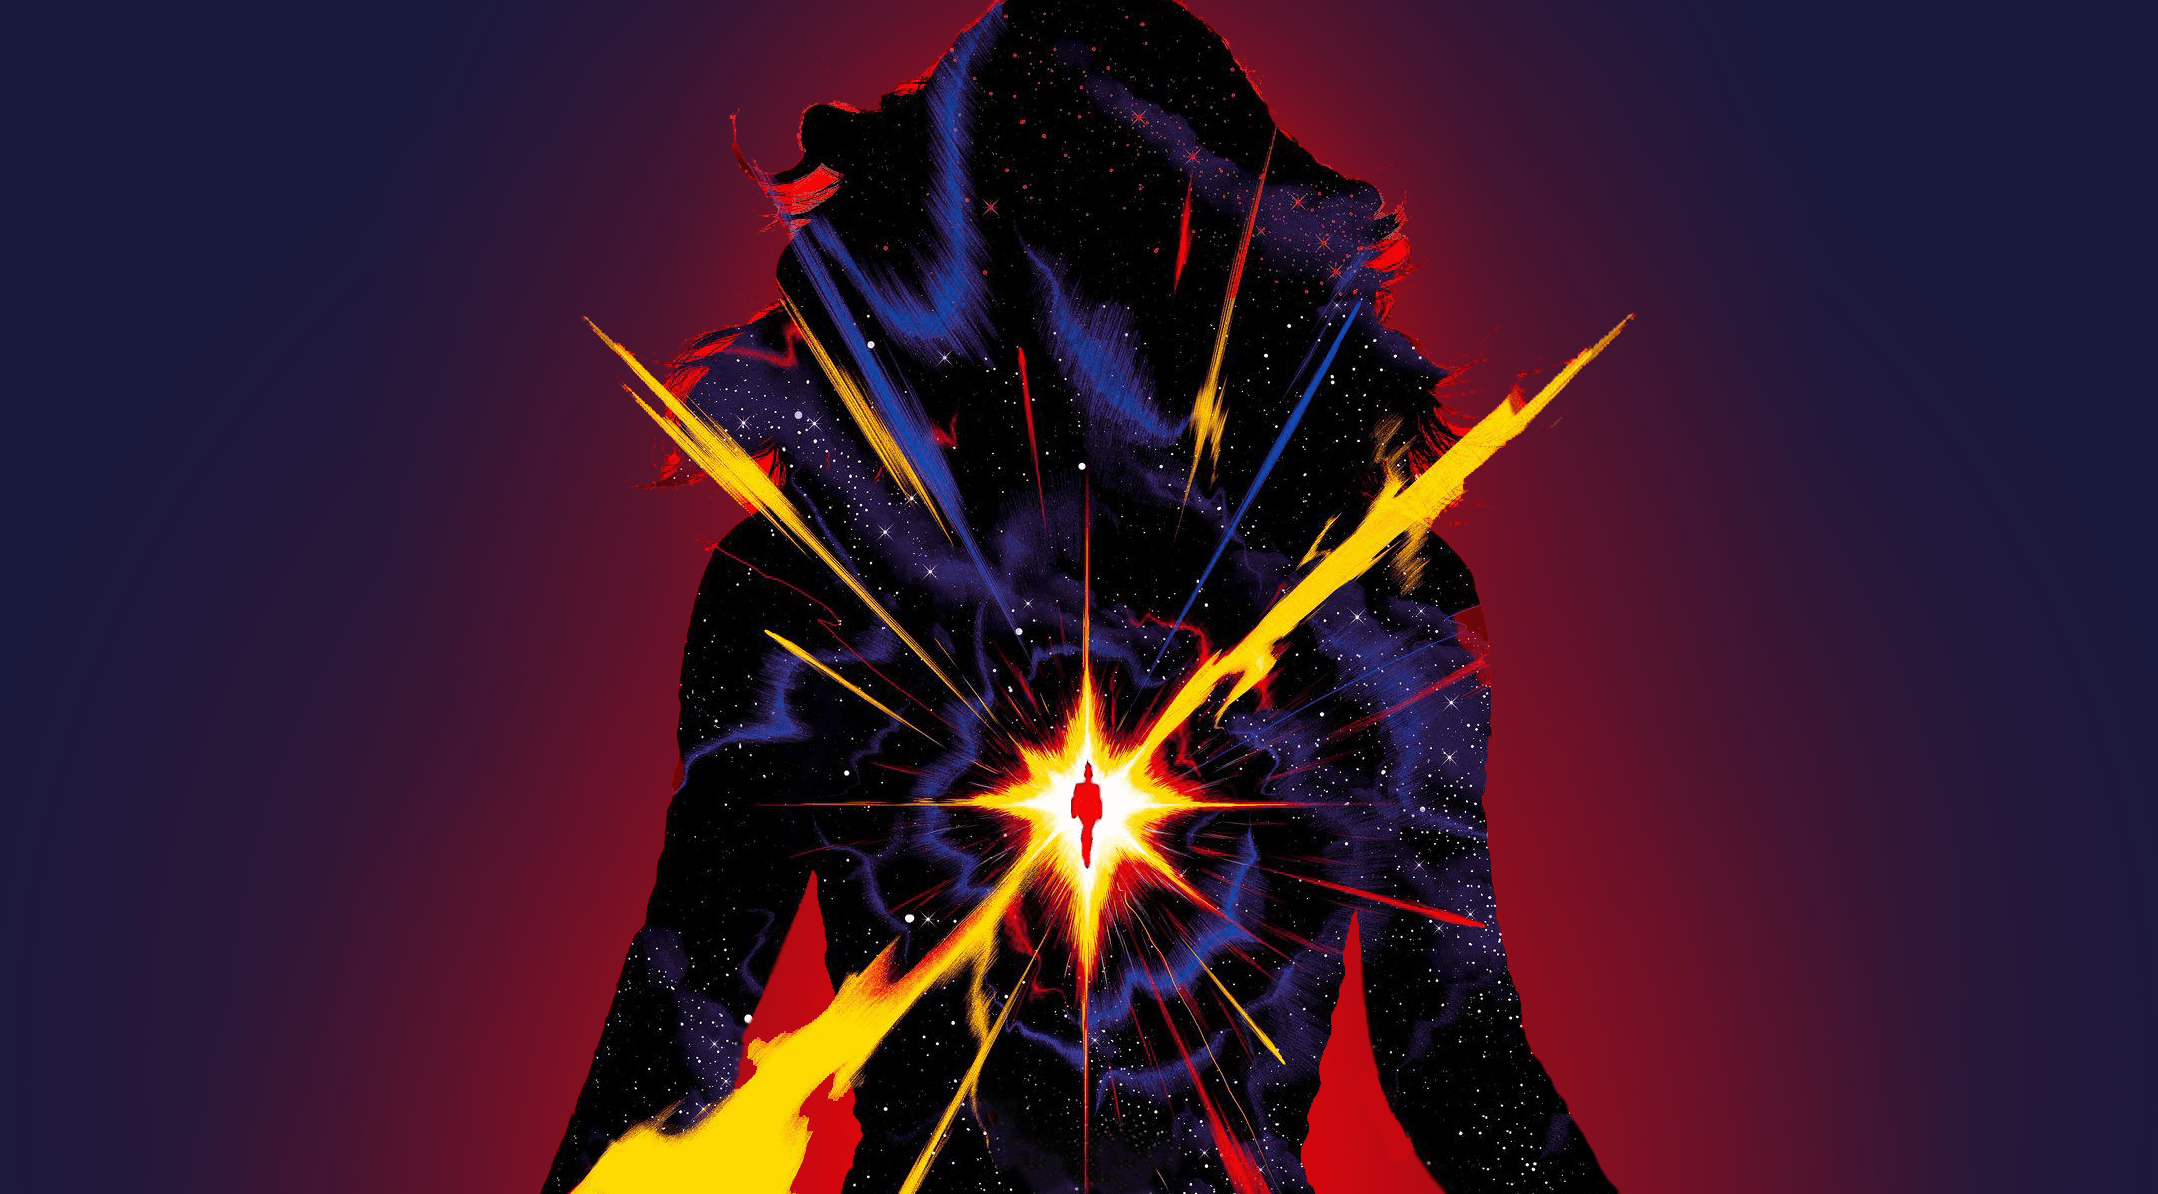 Made This Captain Marvel Wallpaper! Feel free to use